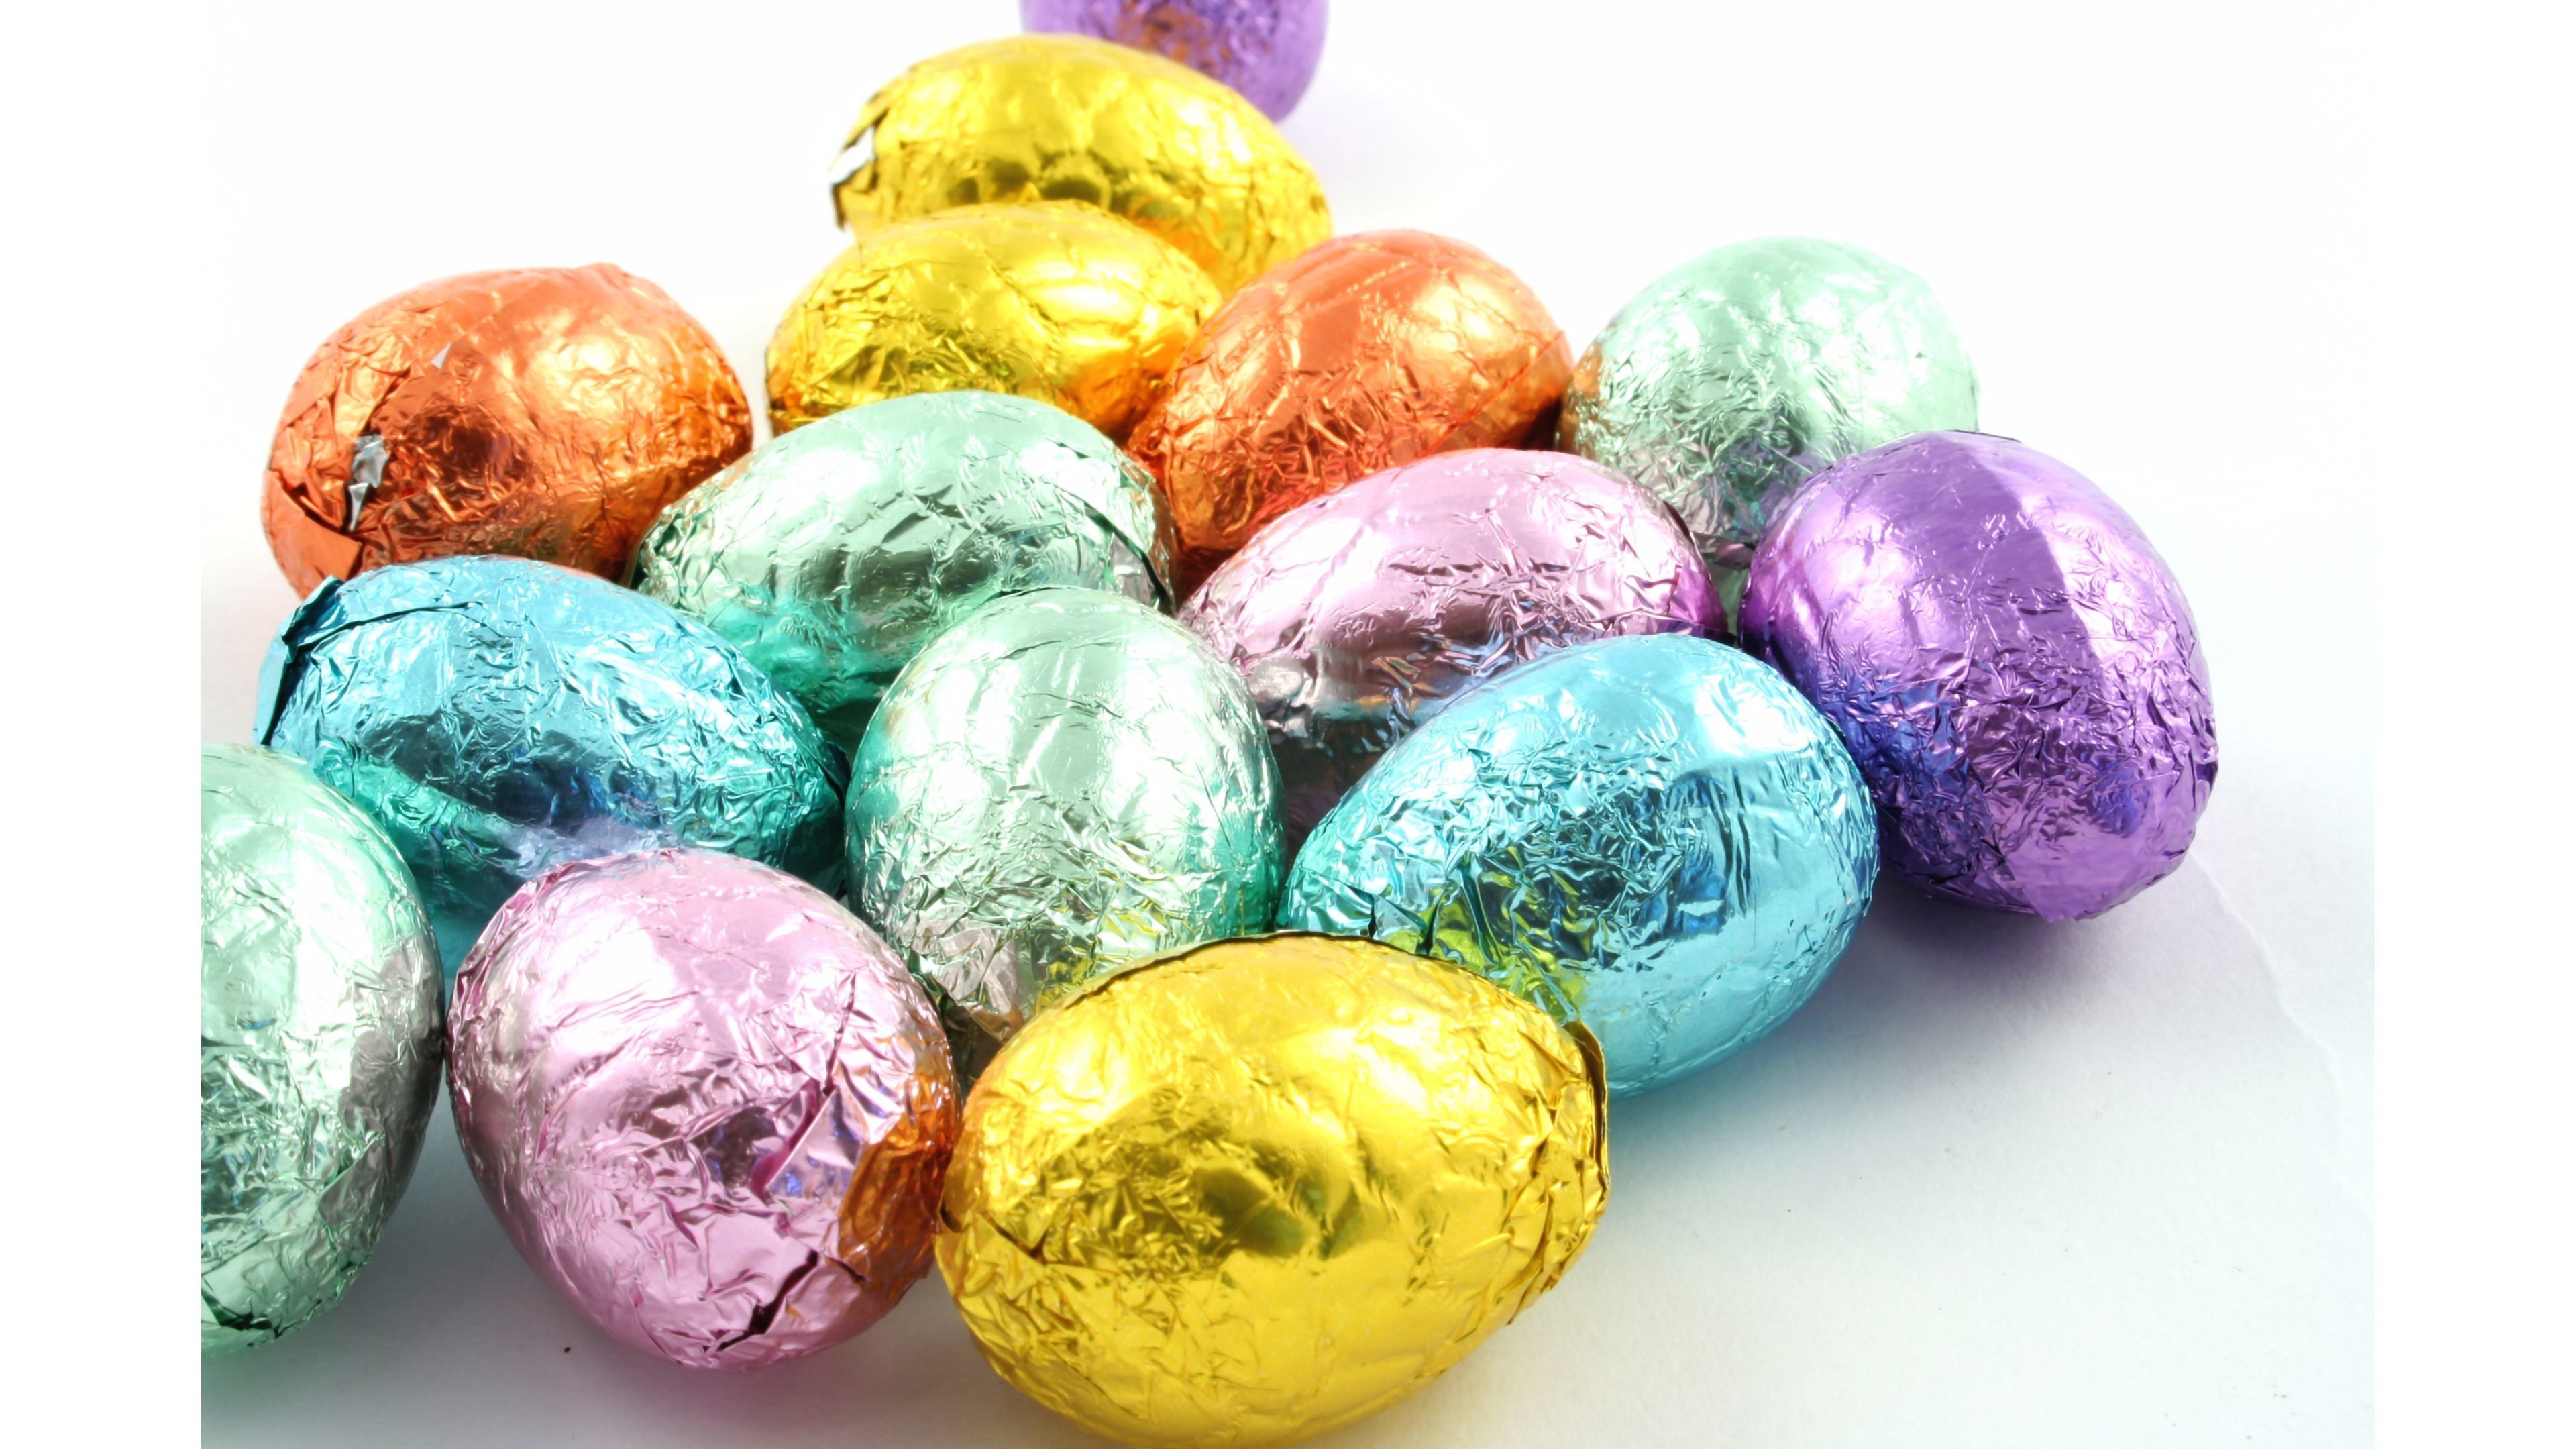 Chocolate Candy Happy Easter 4k Wallpaper Data Src Eggs White Background